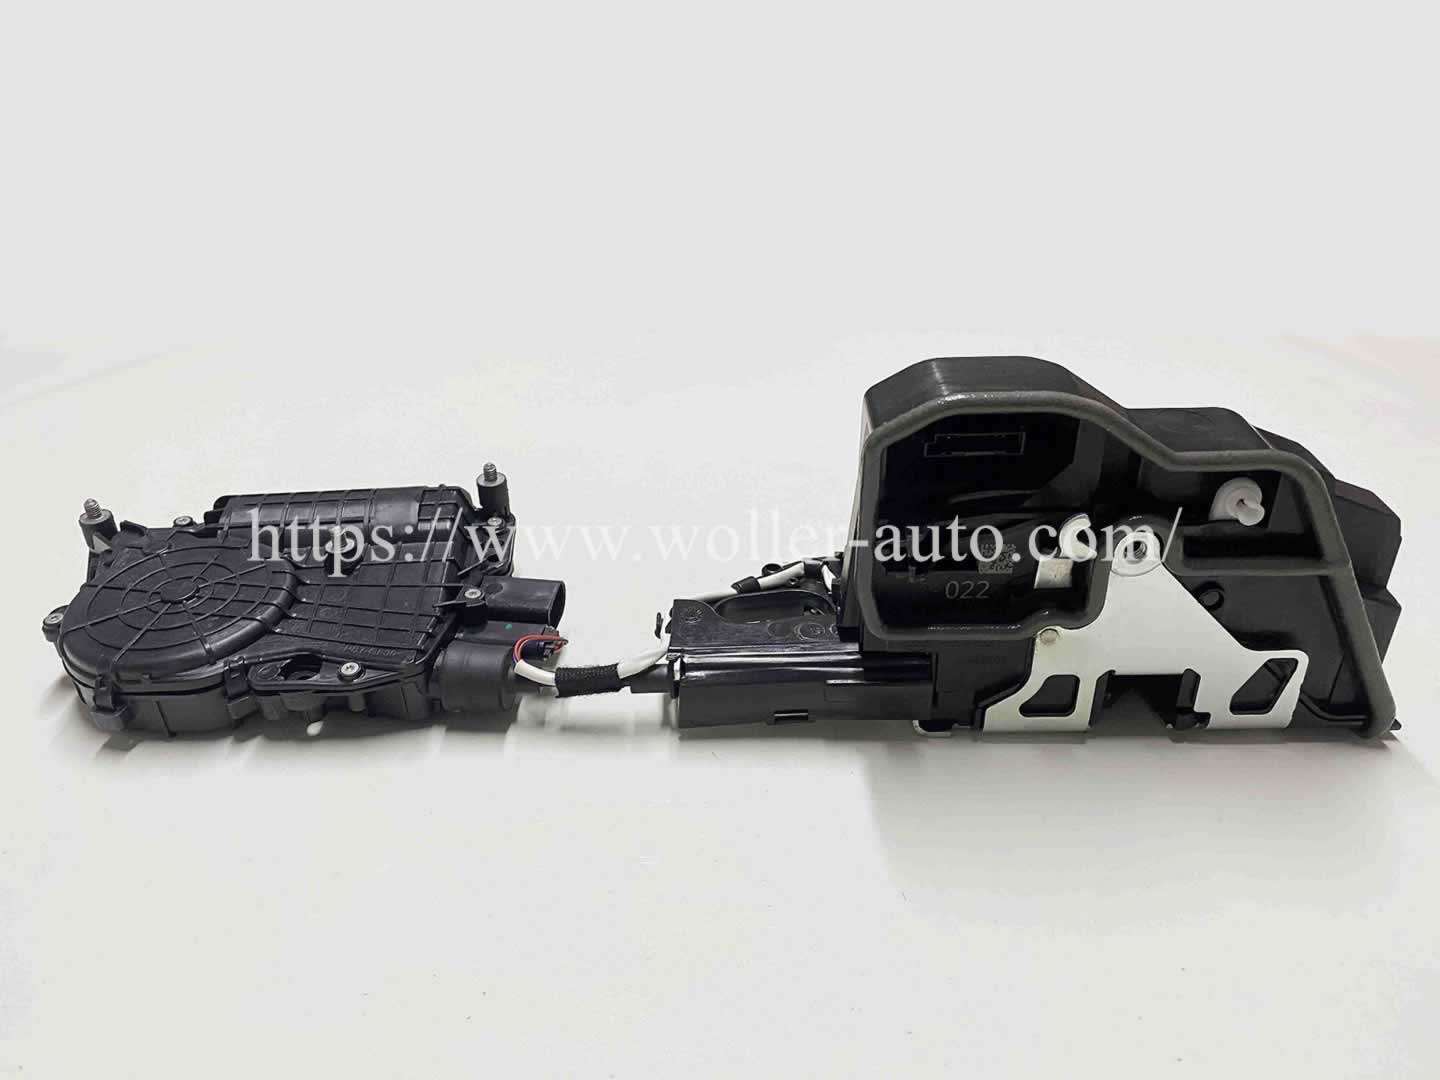 Rear left Side Soft Close Auto Door Lock Actuator OE 51227185687 / 51 22 7 185 687 / 7185687 For BMW F01 F02 F04 F10 F11 S323A 5 Series 7 Series